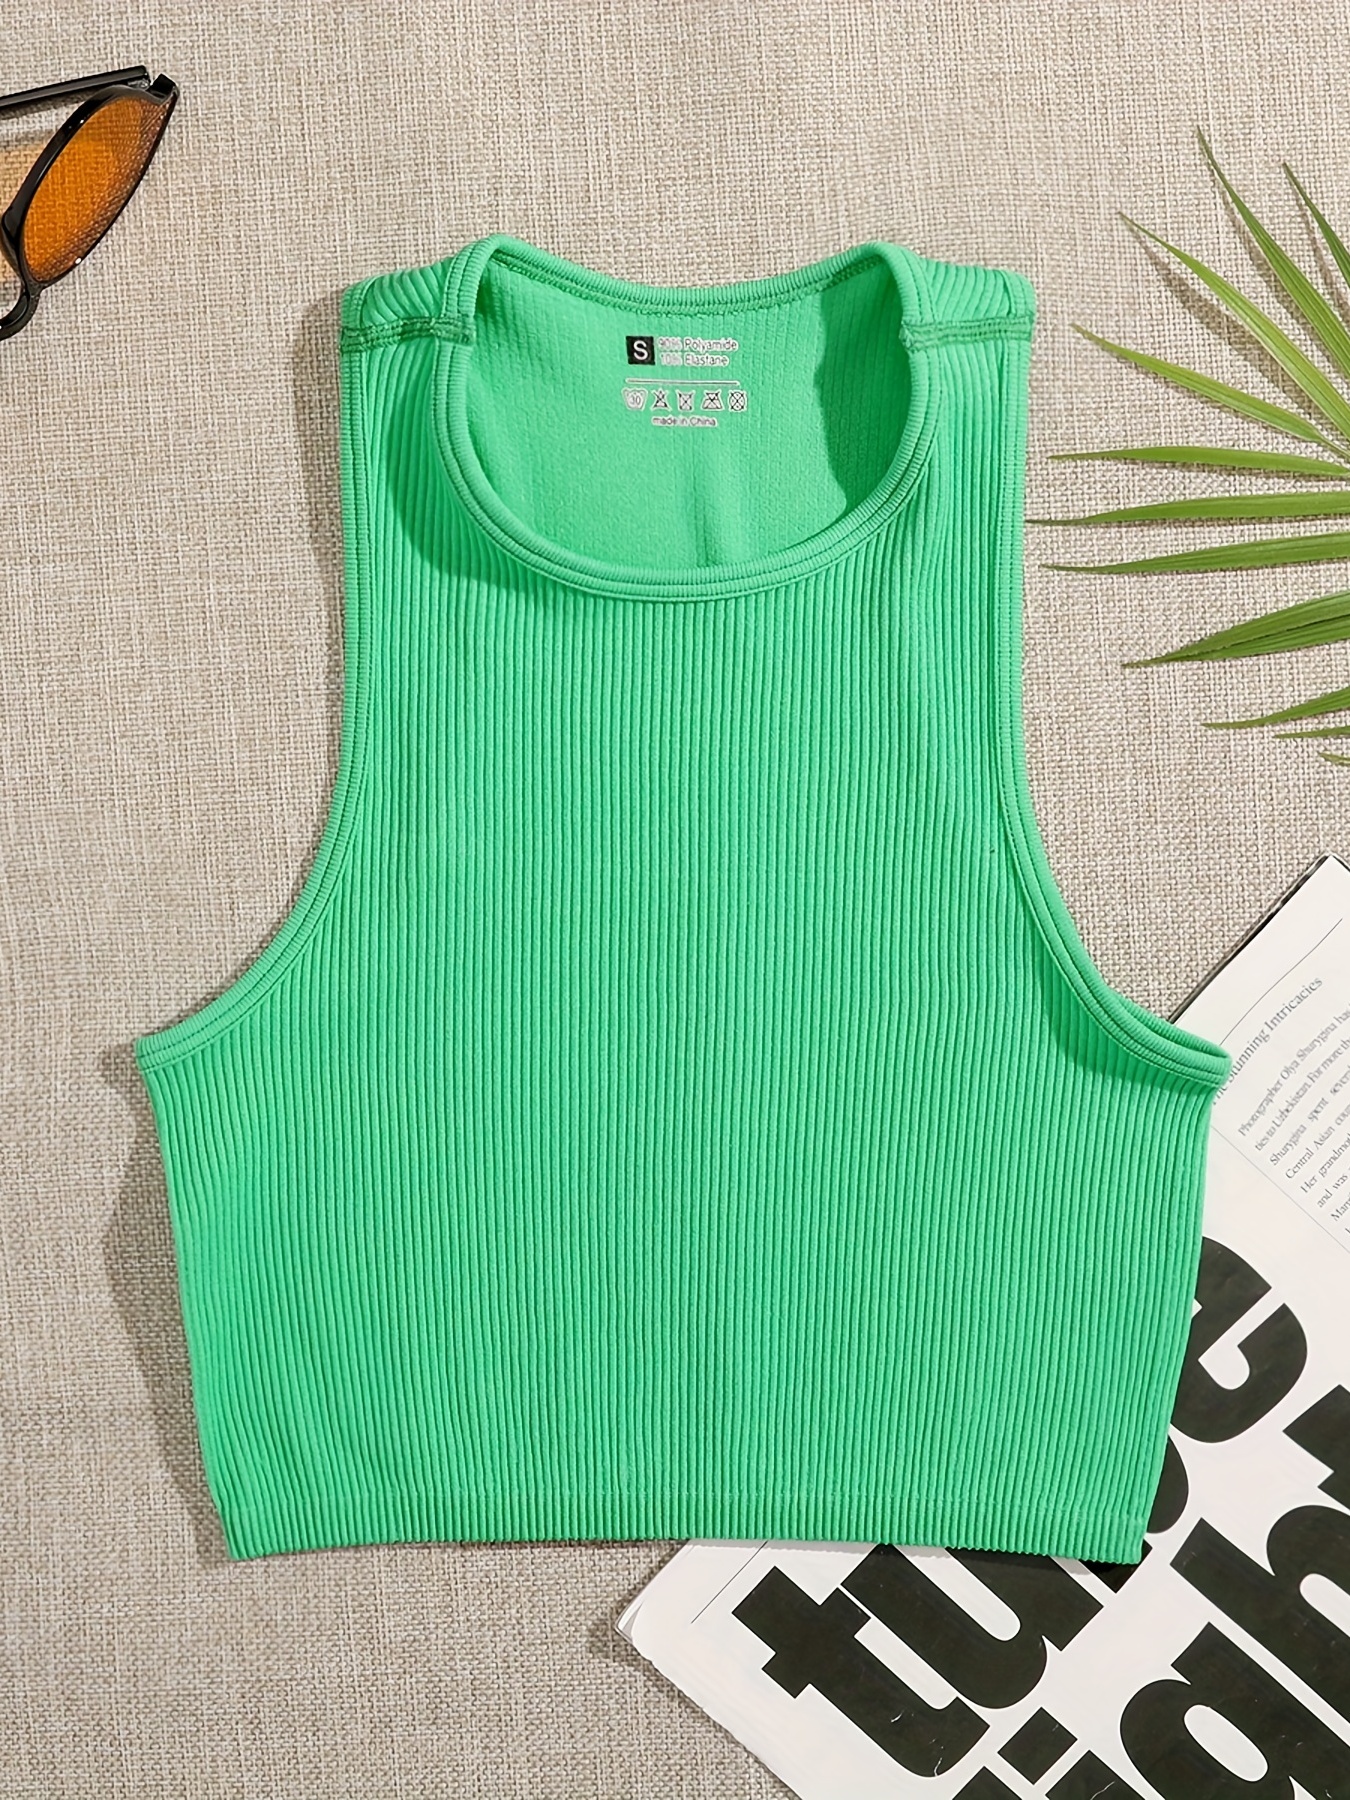 Ribbed Knit Seamless Halter Neck Crop Tank Top (Neon Lime, LXL)